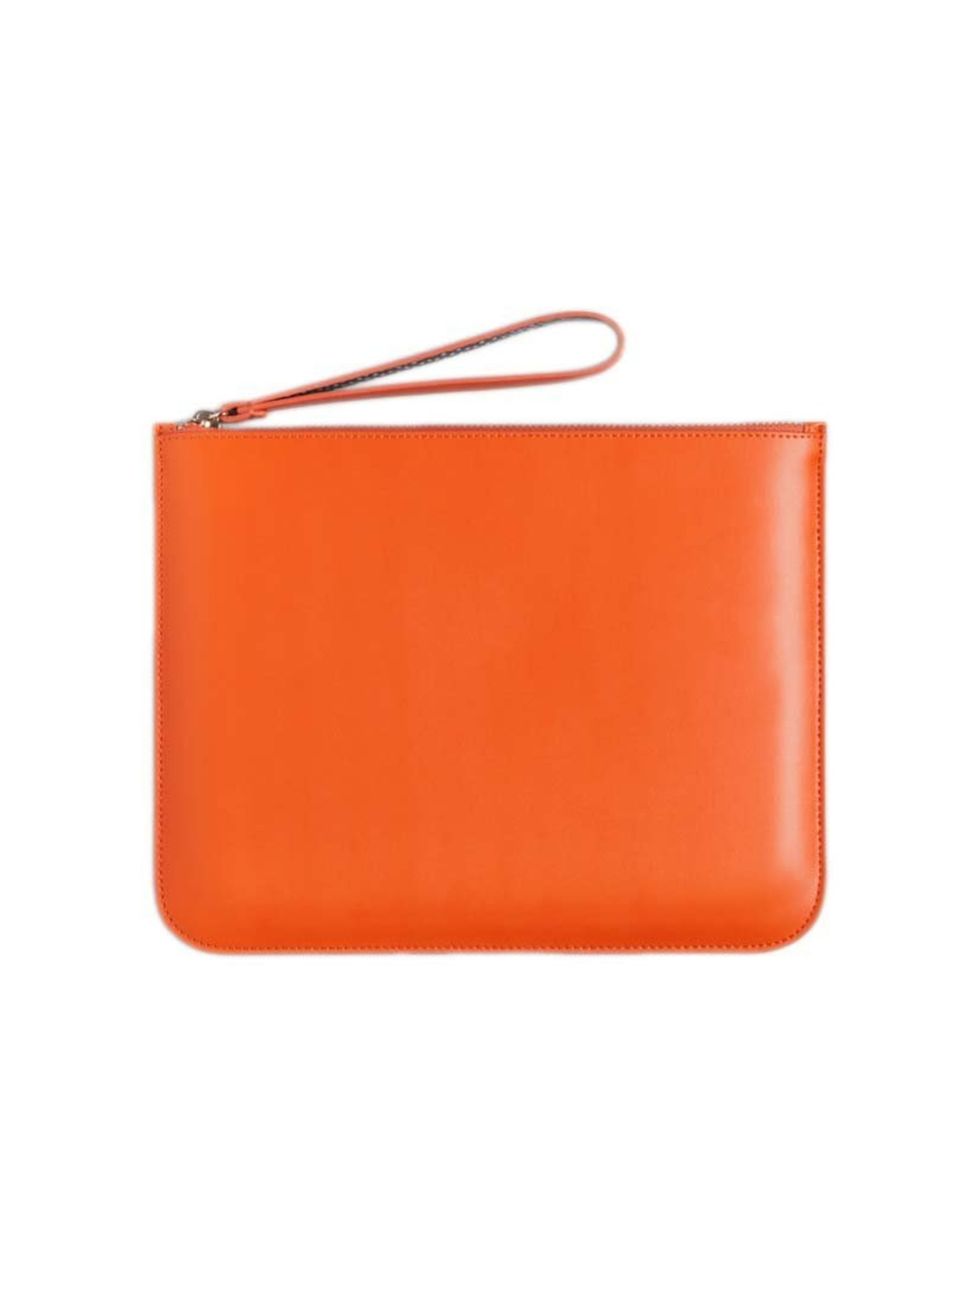 <p>Acting Deputy Chief Sub-Editor Charlotte Cox will add a pop of colour to her everyday style with this sleek clutch.</p><p><a href="http://www.stories.com/gb/Bags/All_bags/Leather_pouch/590765-736313.1">& Other Stories</a> clutch, £29</p>